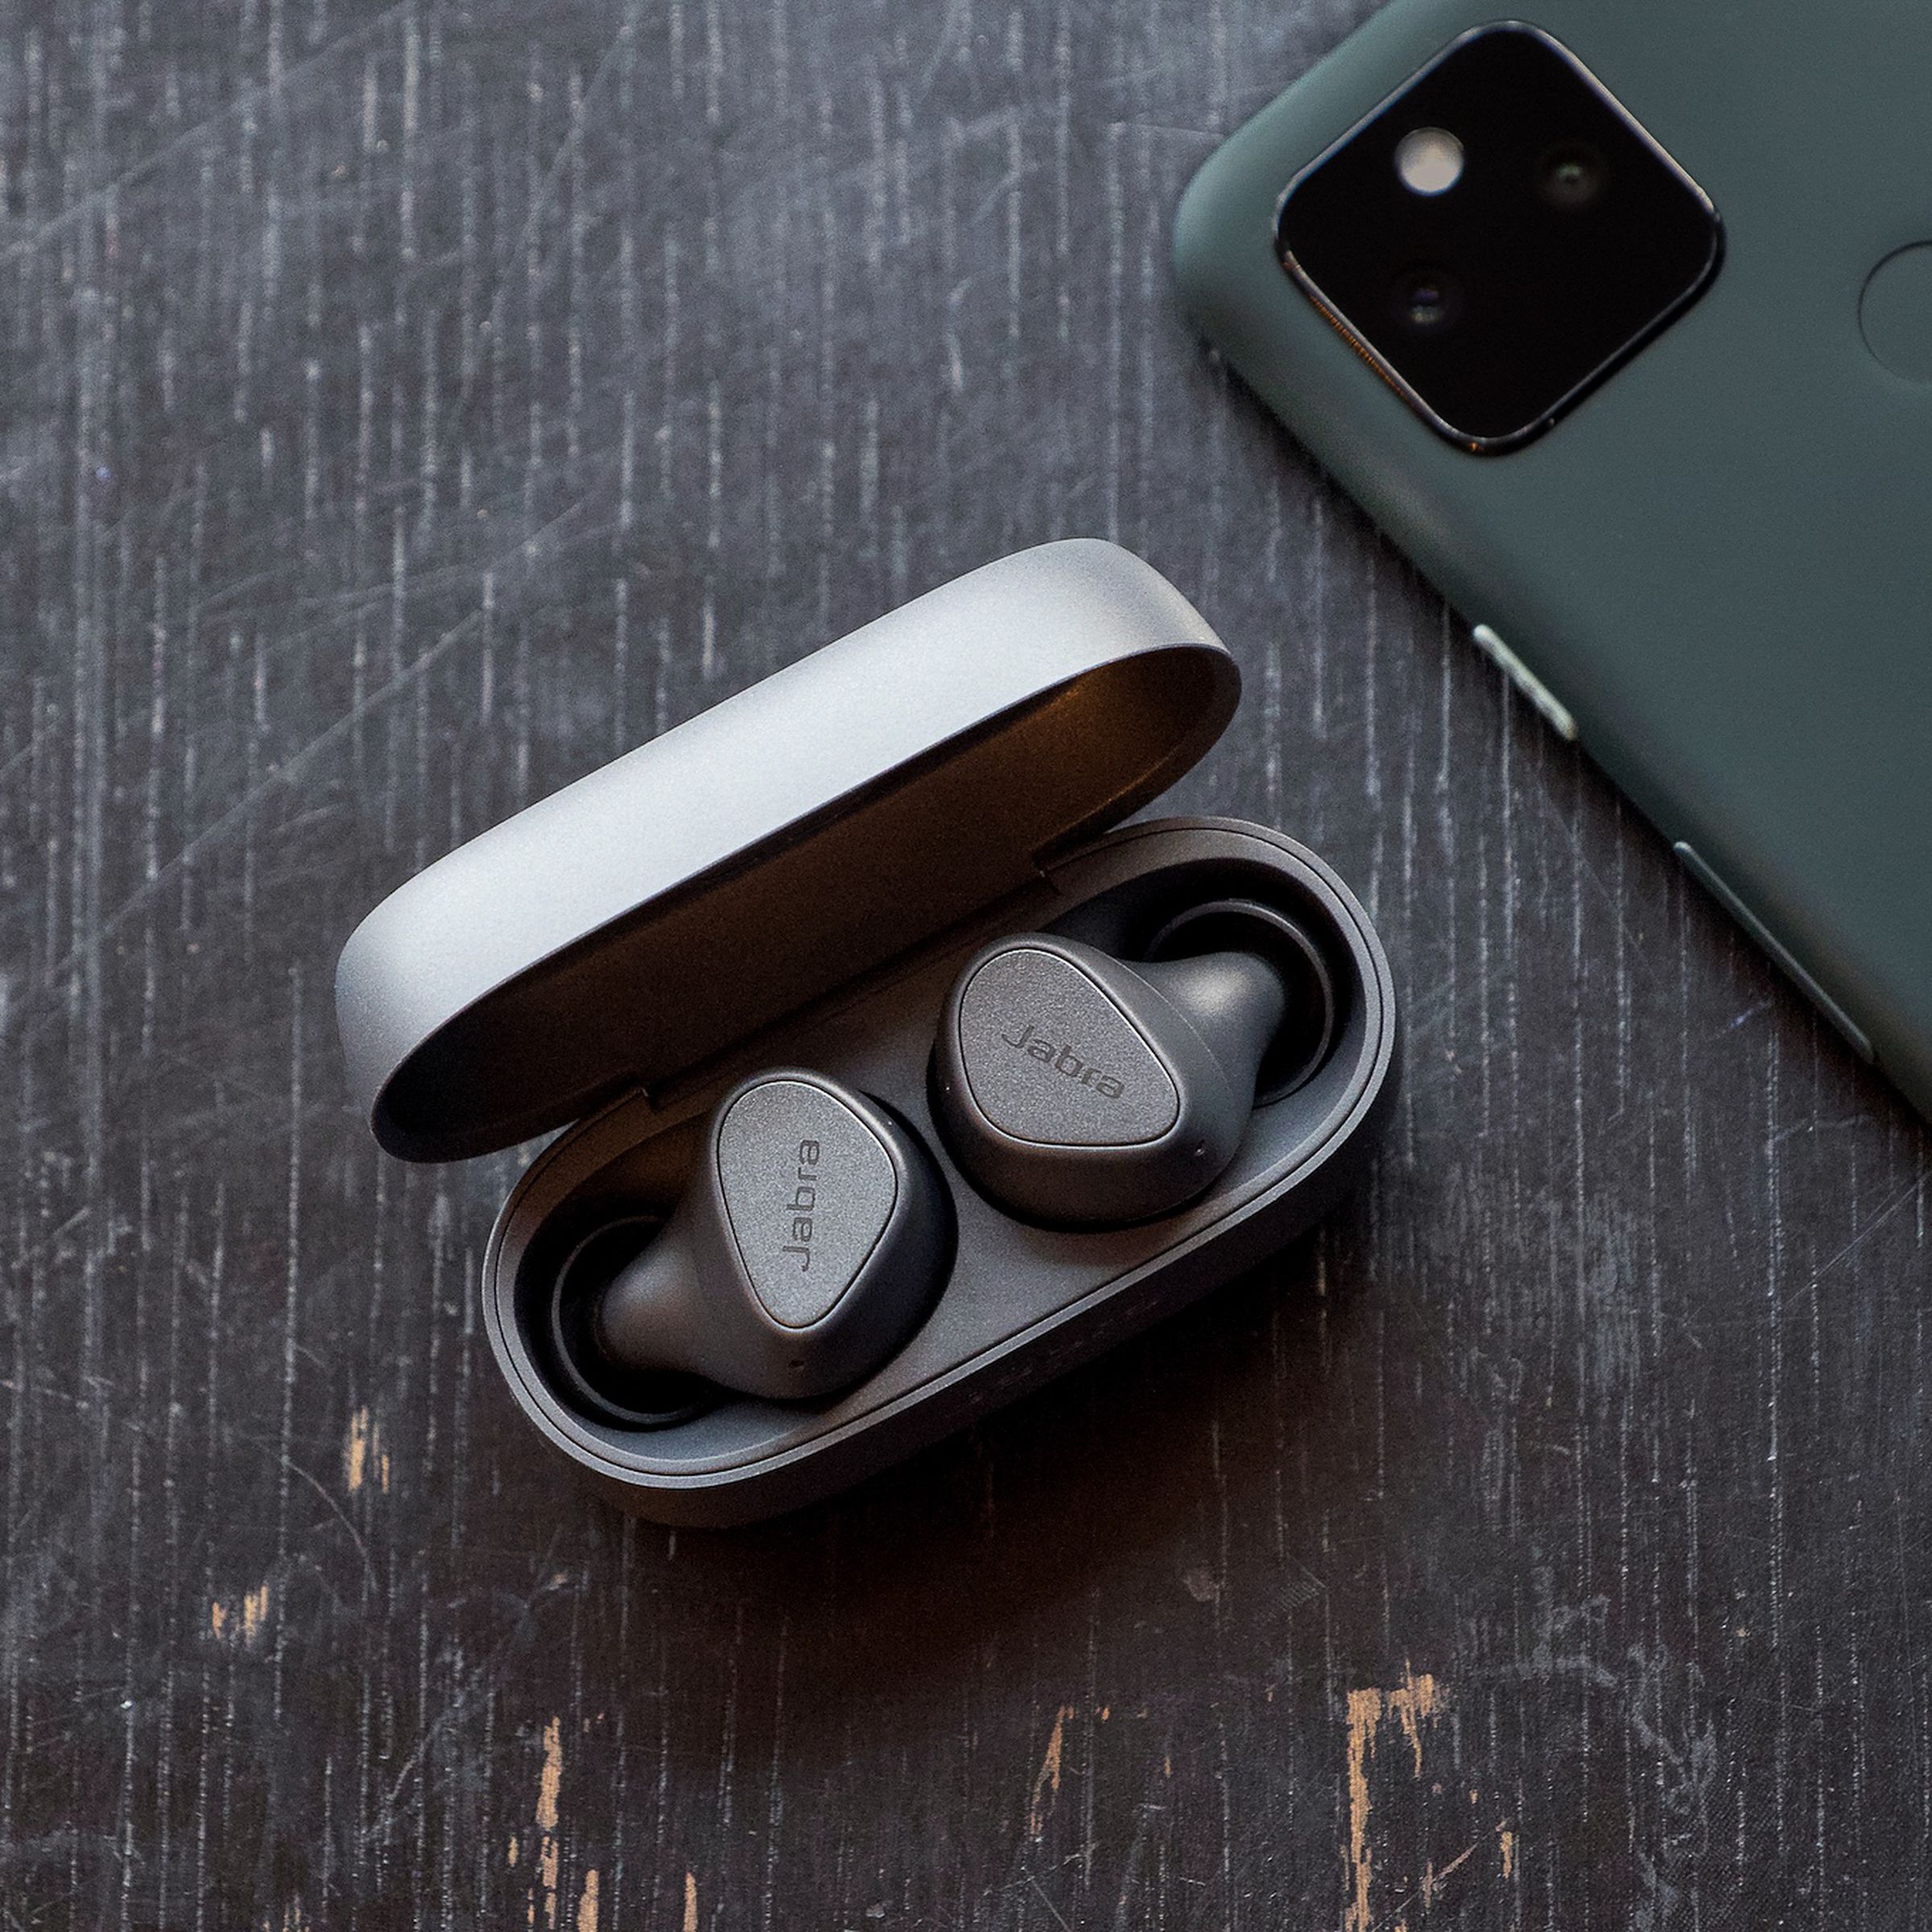 A pair of Jabra’s Elite 3 wireless earbuds sitting on a table near a phone.